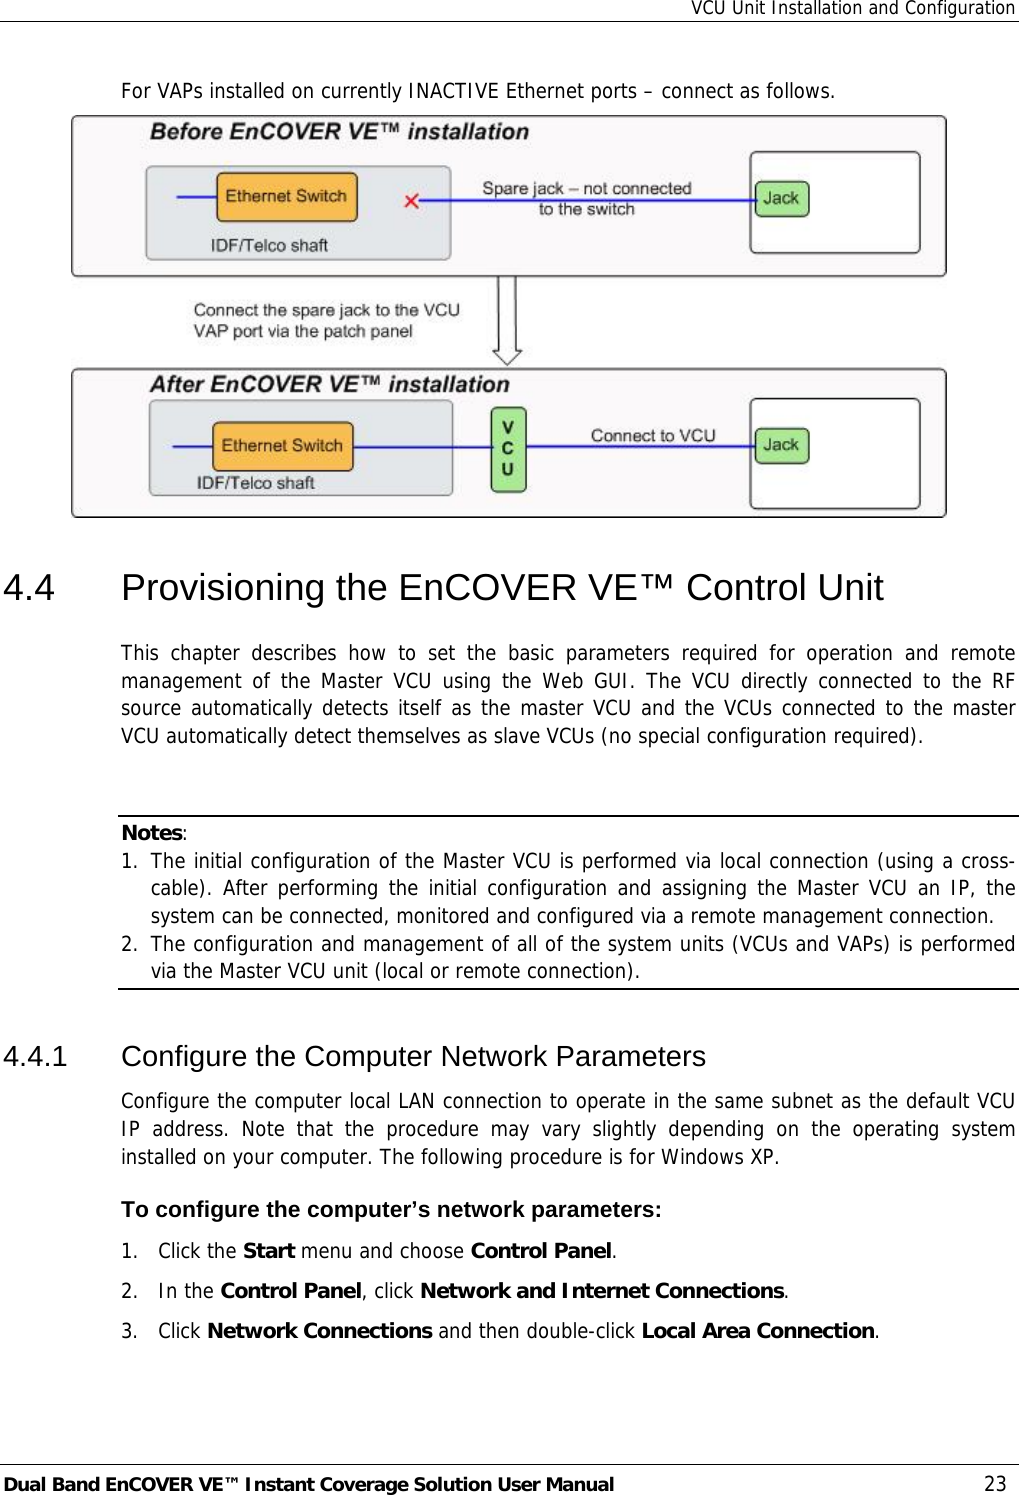 VCU Unit Installation and Configuration Dual Band EnCOVER VE™ Instant Coverage Solution User Manual  23 For VAPs installed on currently INACTIVE Ethernet ports – connect as follows.  4.4  Provisioning the EnCOVER VE™ Control Unit This chapter describes how to set the basic parameters required for operation and remote management of the Master VCU using the Web GUI. The VCU directly connected to the RF source automatically detects itself as the master VCU and the VCUs connected to the master VCU automatically detect themselves as slave VCUs (no special configuration required).    Notes:  1. The initial configuration of the Master VCU is performed via local connection (using a cross-cable). After performing the initial configuration and assigning the Master VCU an IP, the system can be connected, monitored and configured via a remote management connection. 2. The configuration and management of all of the system units (VCUs and VAPs) is performed via the Master VCU unit (local or remote connection). 4.4.1  Configure the Computer Network Parameters Configure the computer local LAN connection to operate in the same subnet as the default VCU IP address. Note that the procedure may vary slightly depending on the operating system installed on your computer. The following procedure is for Windows XP. To configure the computer’s network parameters: 1. Click the Start menu and choose Control Panel. 2. In the Control Panel, click Network and Internet Connections. 3. Click Network Connections and then double-click Local Area Connection. 